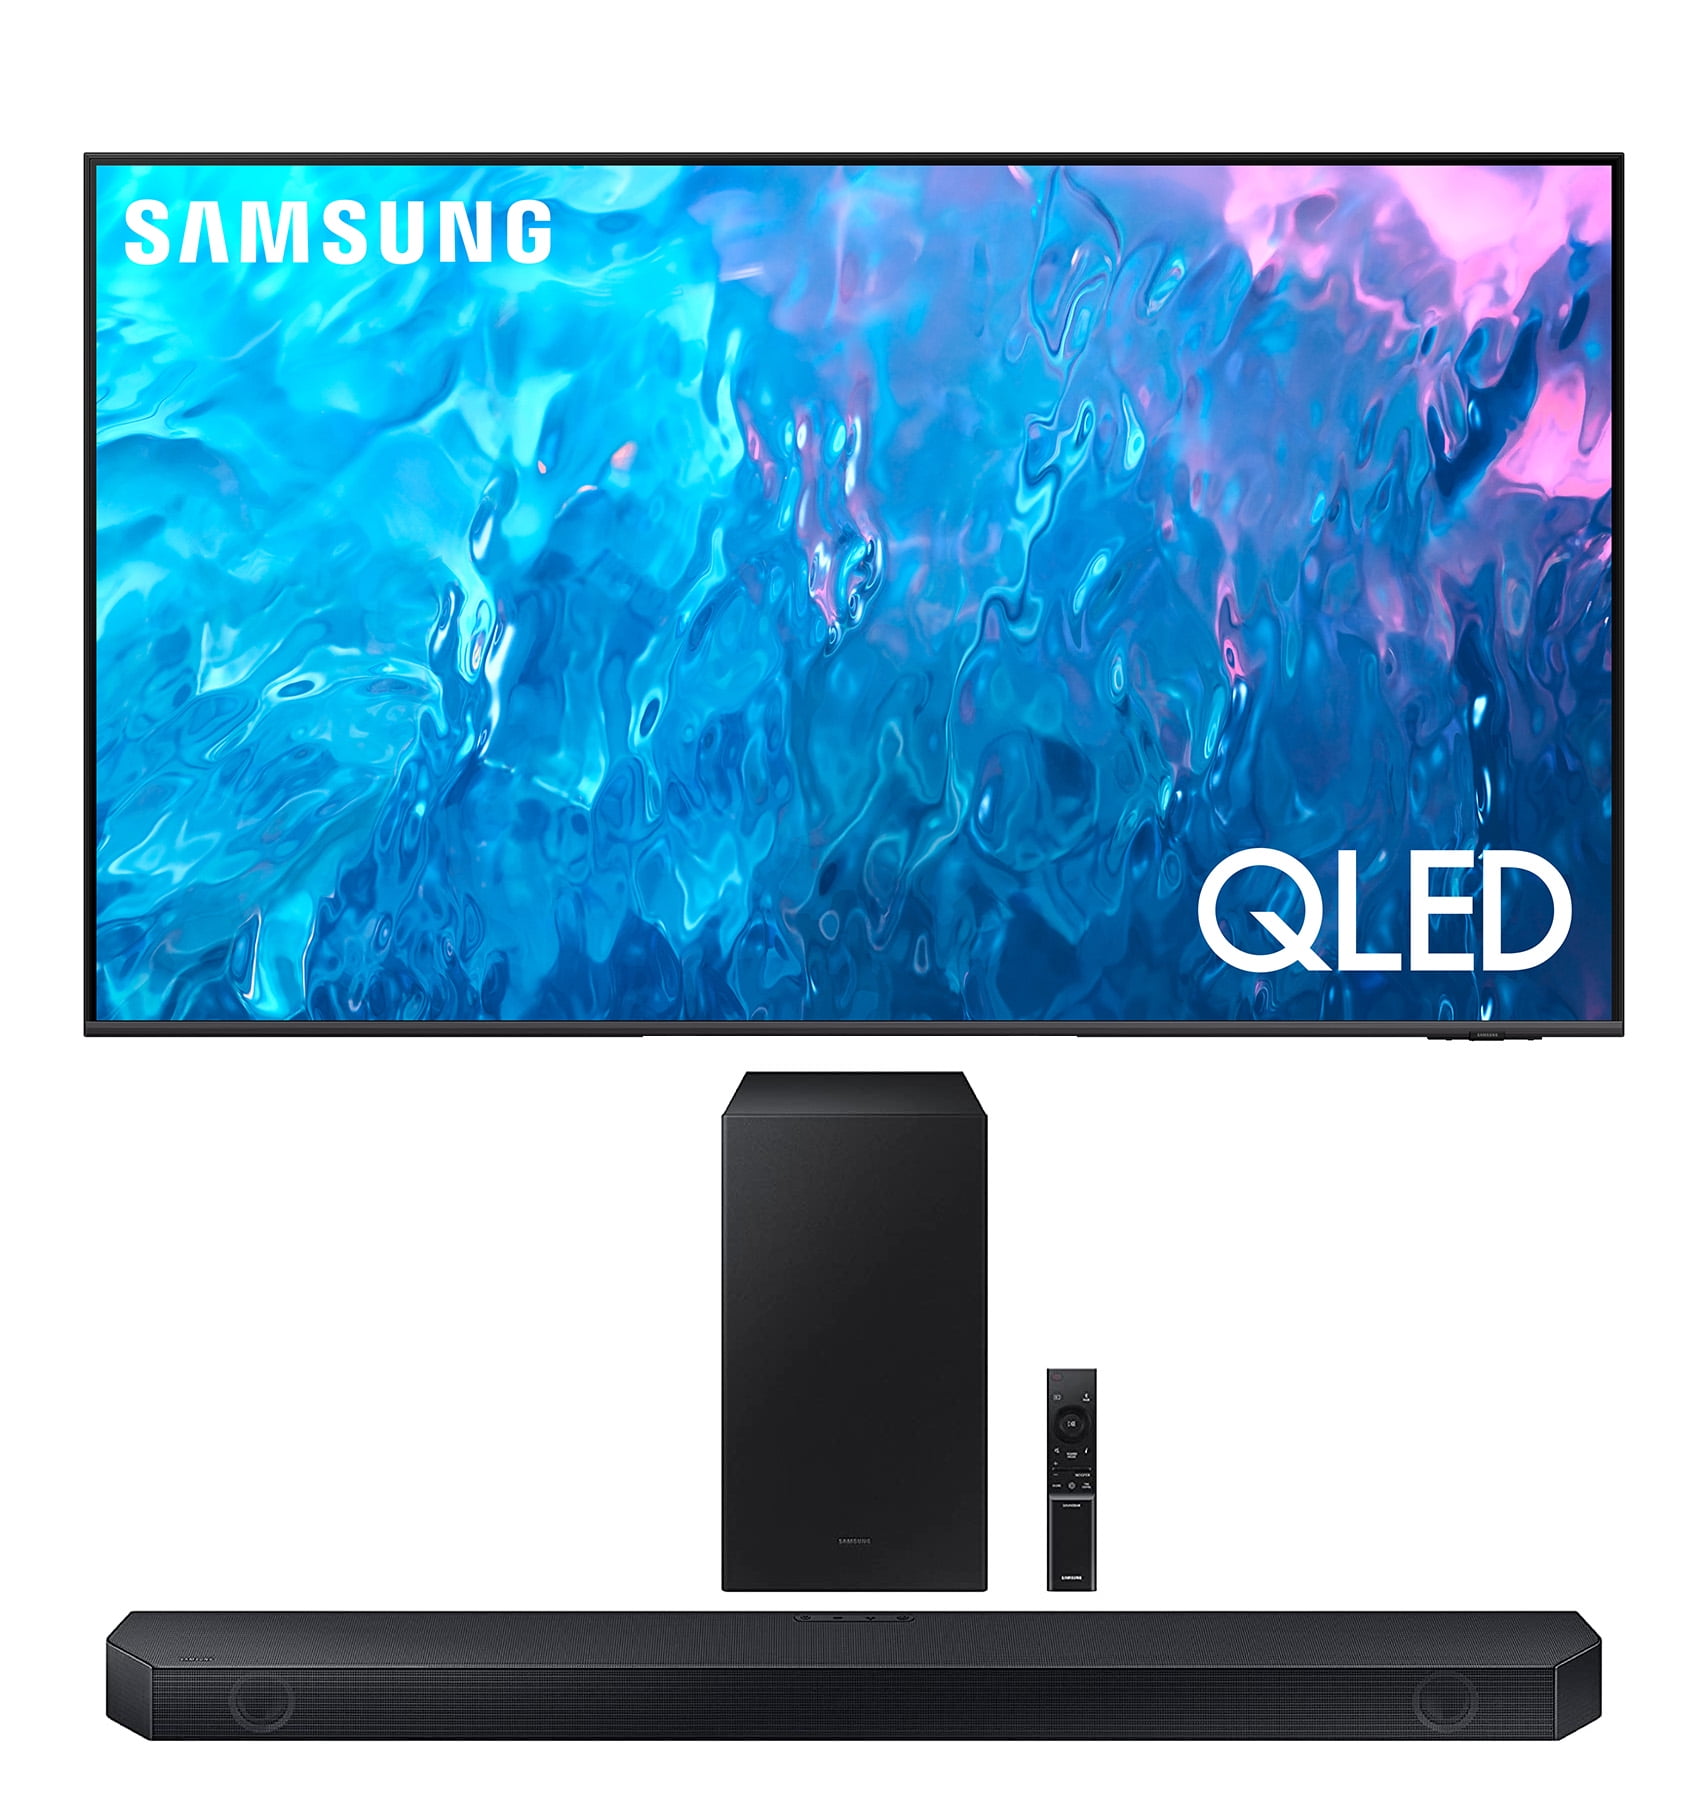 Subwoofer with and Inch QN75Q70CAFXZA Soundbar a 3.1ch Smart TV Quantum 4K with Dolby Atmos Samsung QLED LED HW-Q60C HDR Dual 75 Samsung (2023)